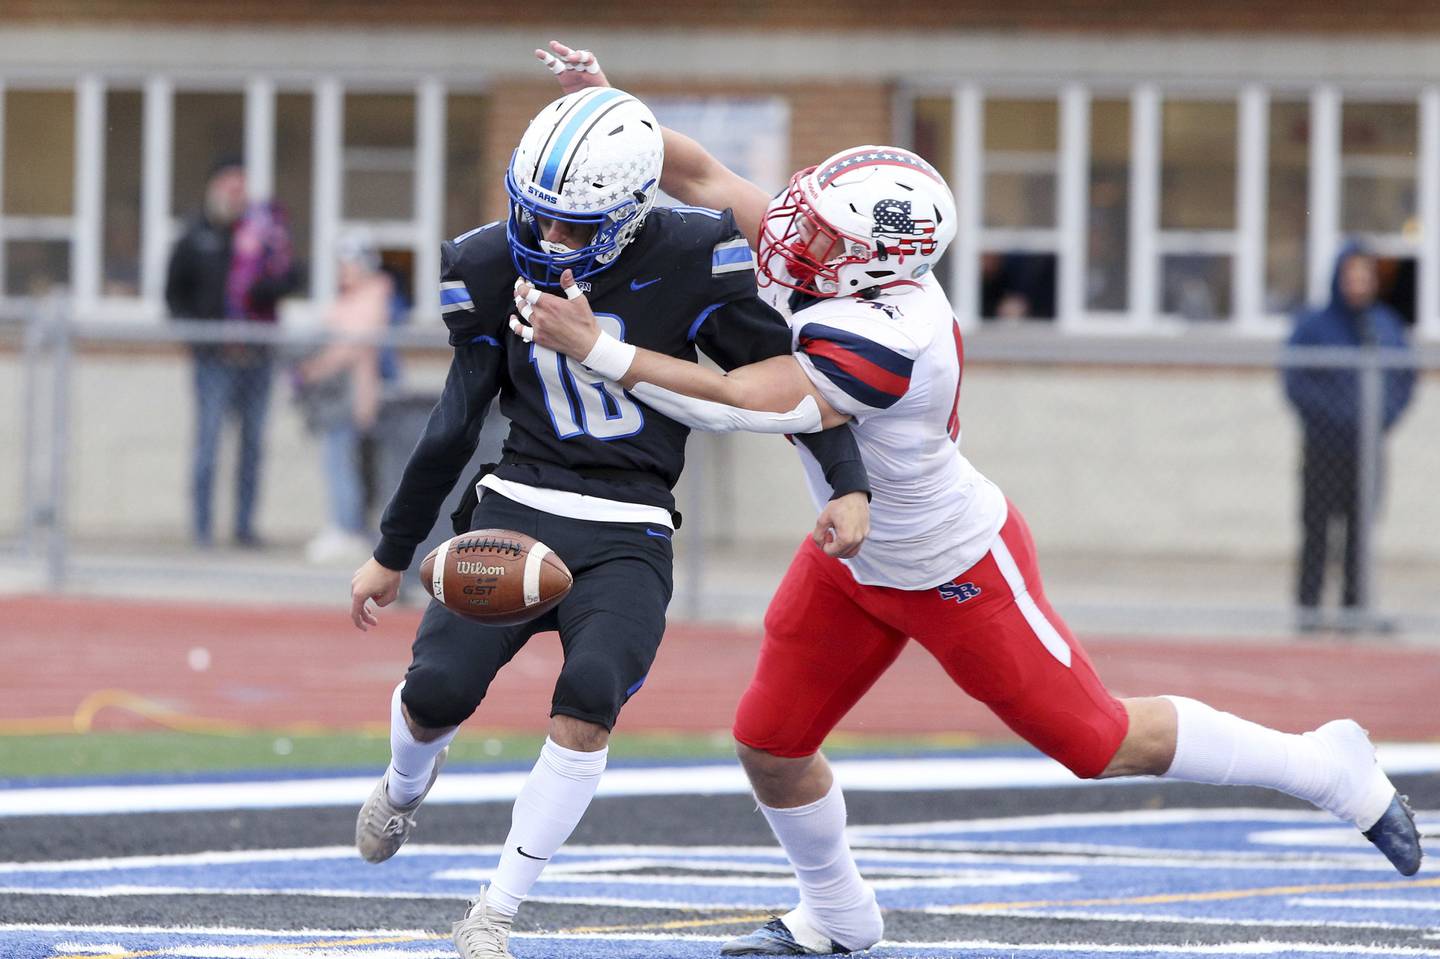 St. Rita's Matt Kingsbury, left, tackles St. Charles North punter Aedan Hayes (18) during a Class 7A state quarterfinal game in St. Charles on Saturday, Nov. 12, 2022.